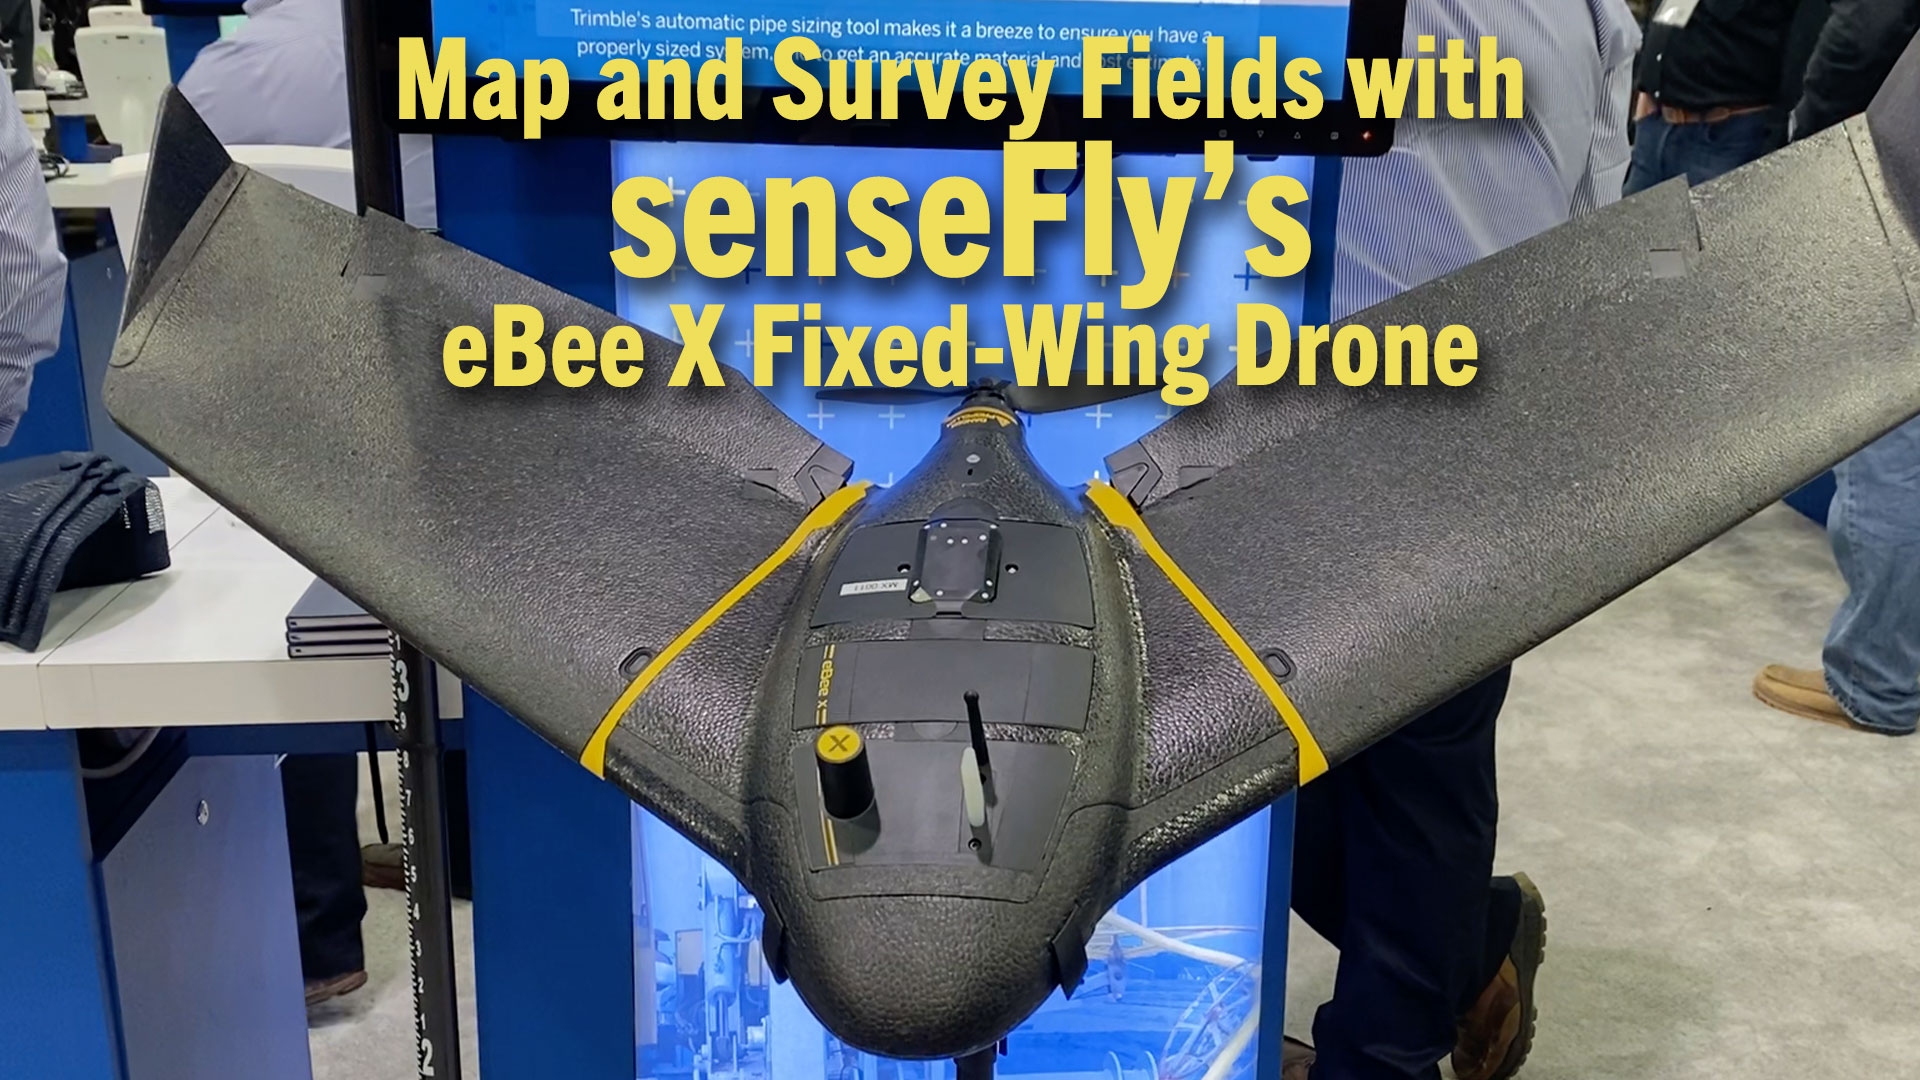 Tilpasning skrige samtale Video] Map and Survey Fields with senseFly's eBee X Fixed-Wing Drone